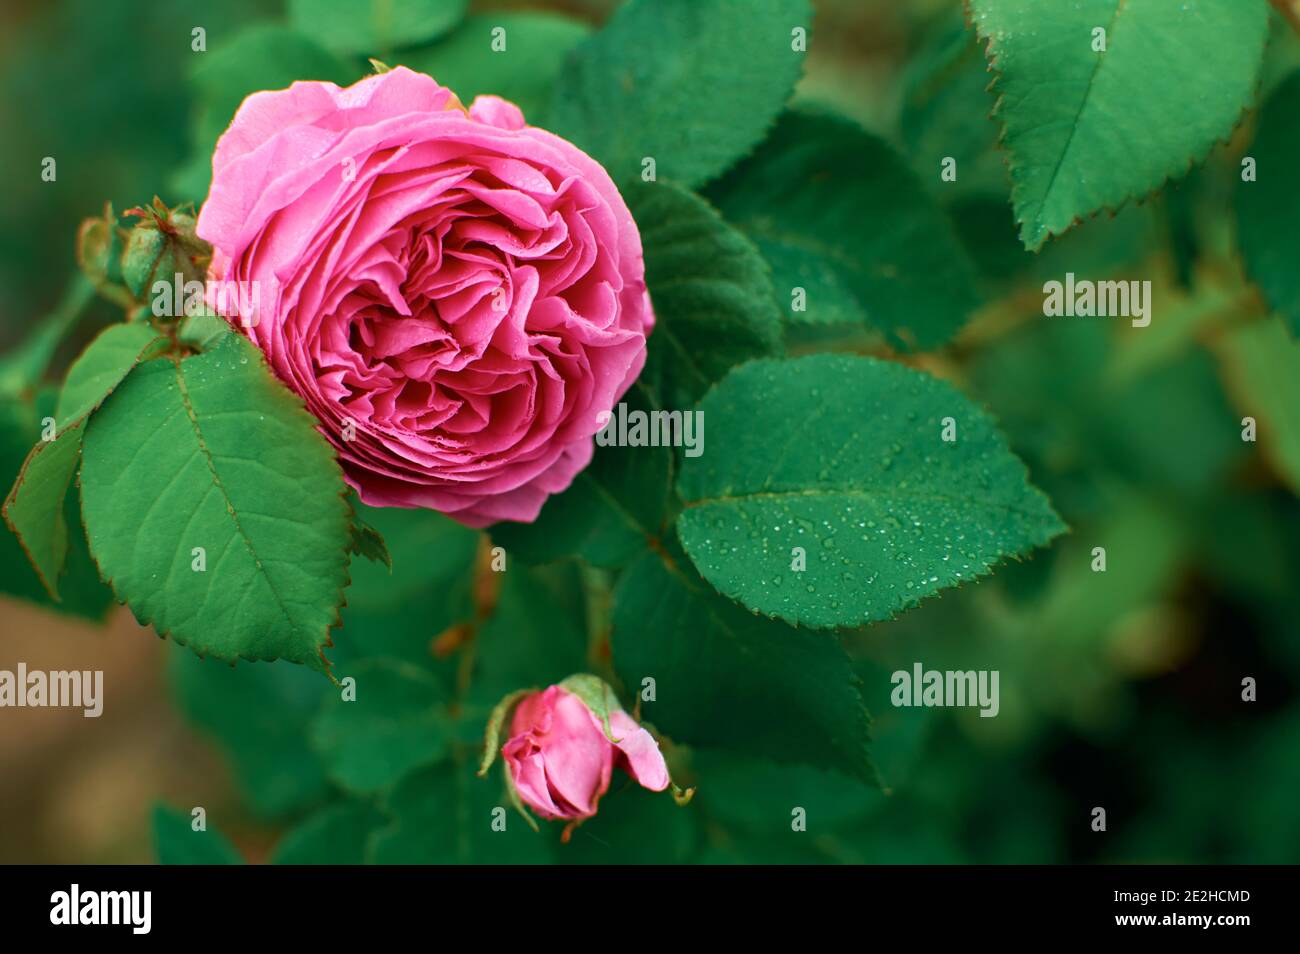 Garden rose. Pink Rose in greenery. Gardening concept. Rose bush on the street. Dew drops on flowers and leaves. Stock Photo